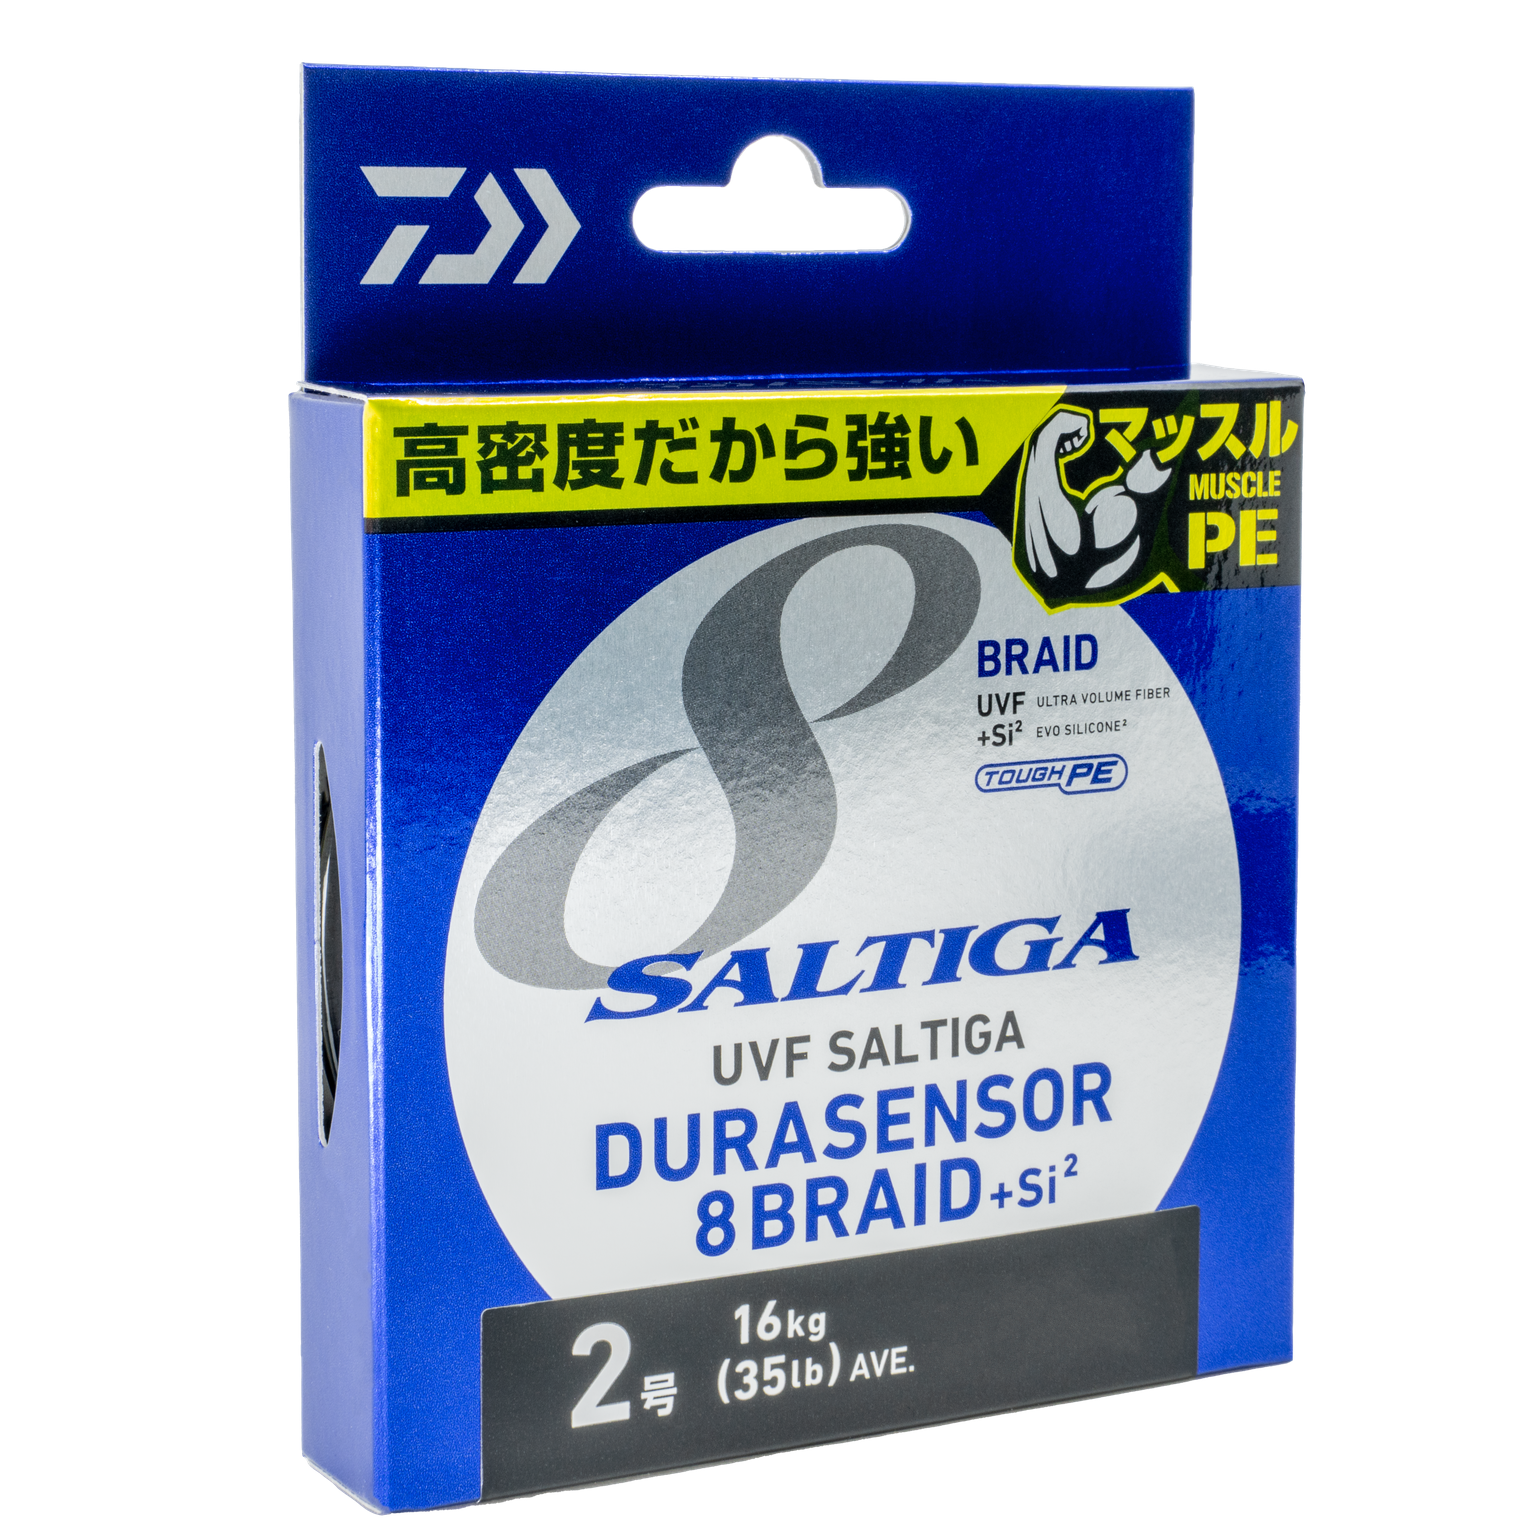 Daiwa Braided Fishing Lines & Leaders 15 lb Line Weight Fishing for sale